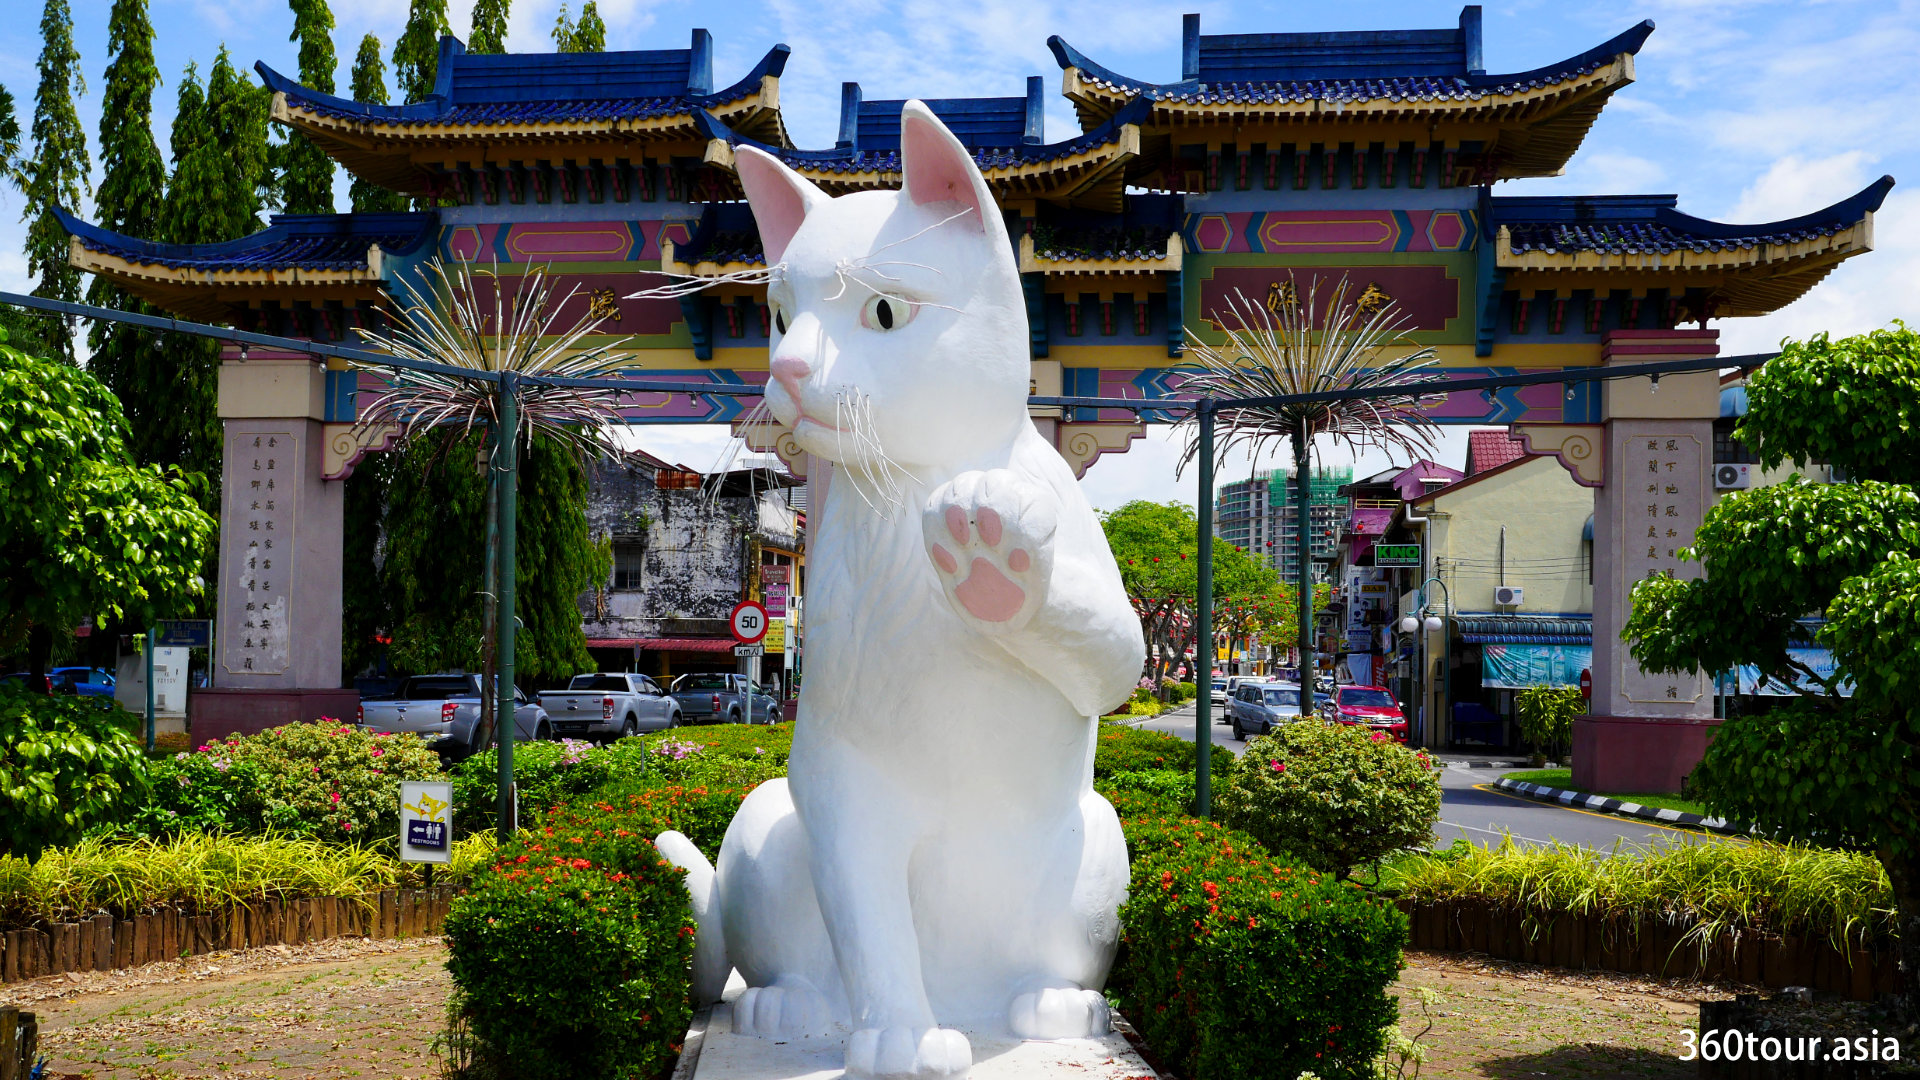 The Great Cat of Kuching – an welcoming icon at Padungan roundabout